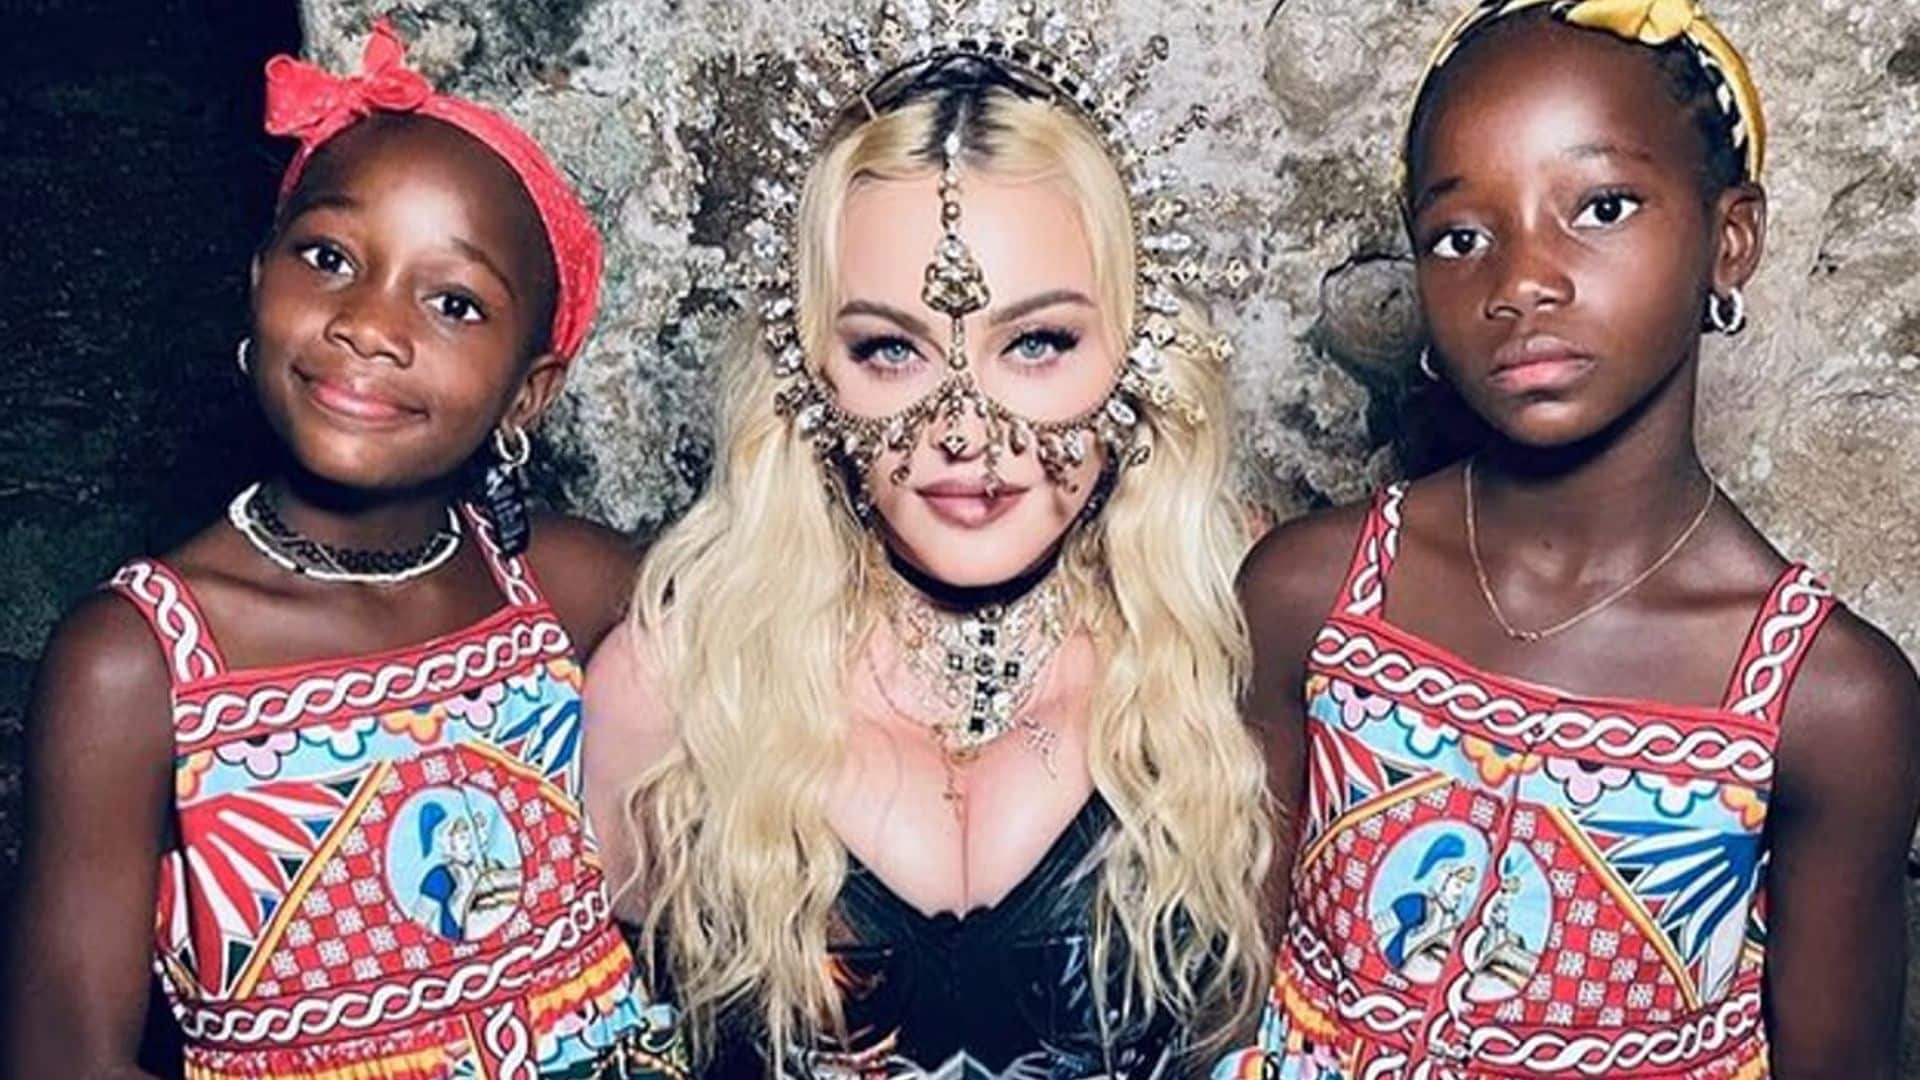 Madonna celebrates her daughters’ birthday with a pool and wig party